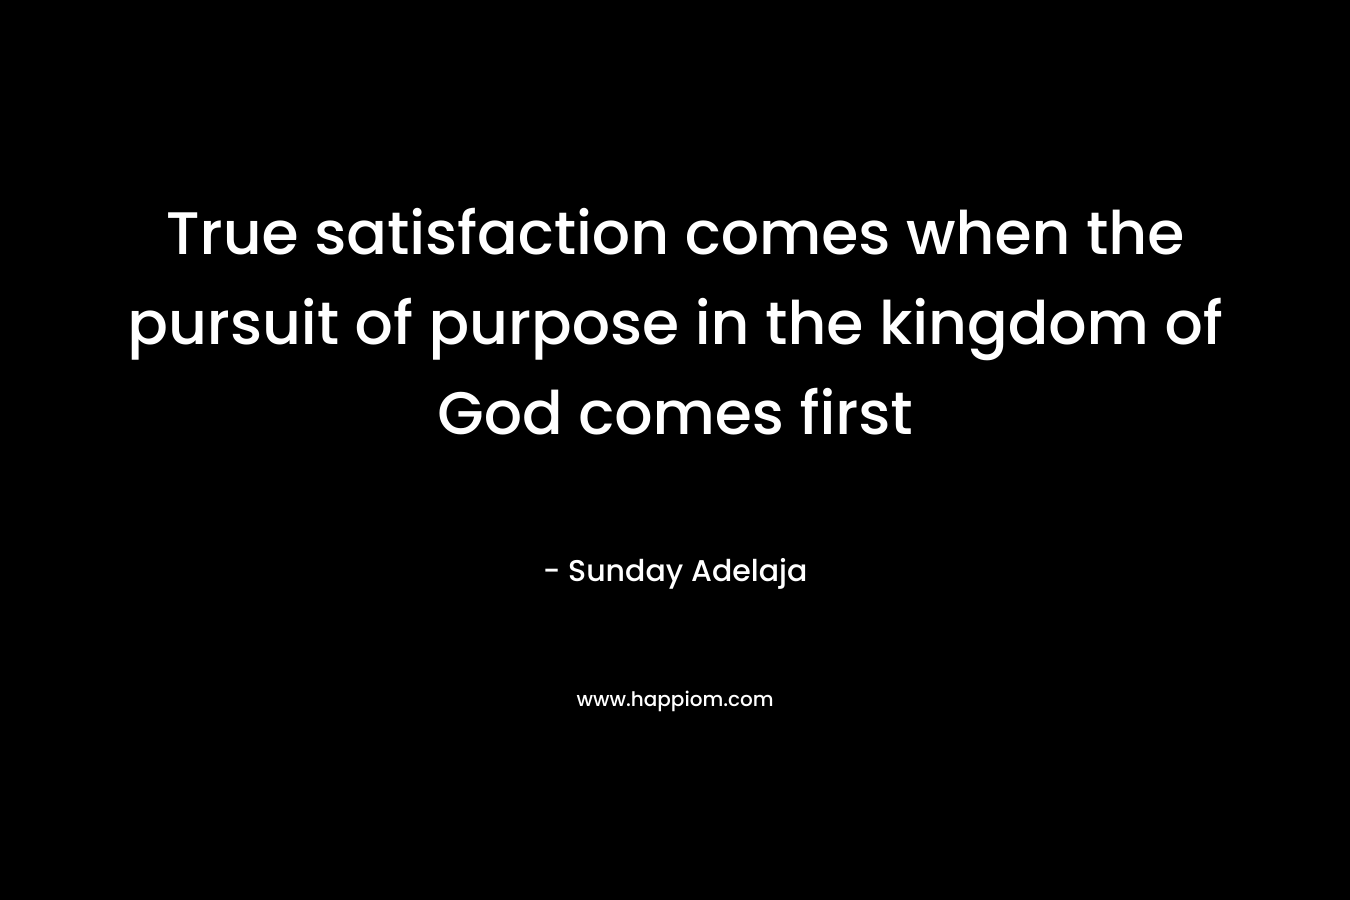 True satisfaction comes when the pursuit of purpose in the kingdom of God comes first – Sunday Adelaja